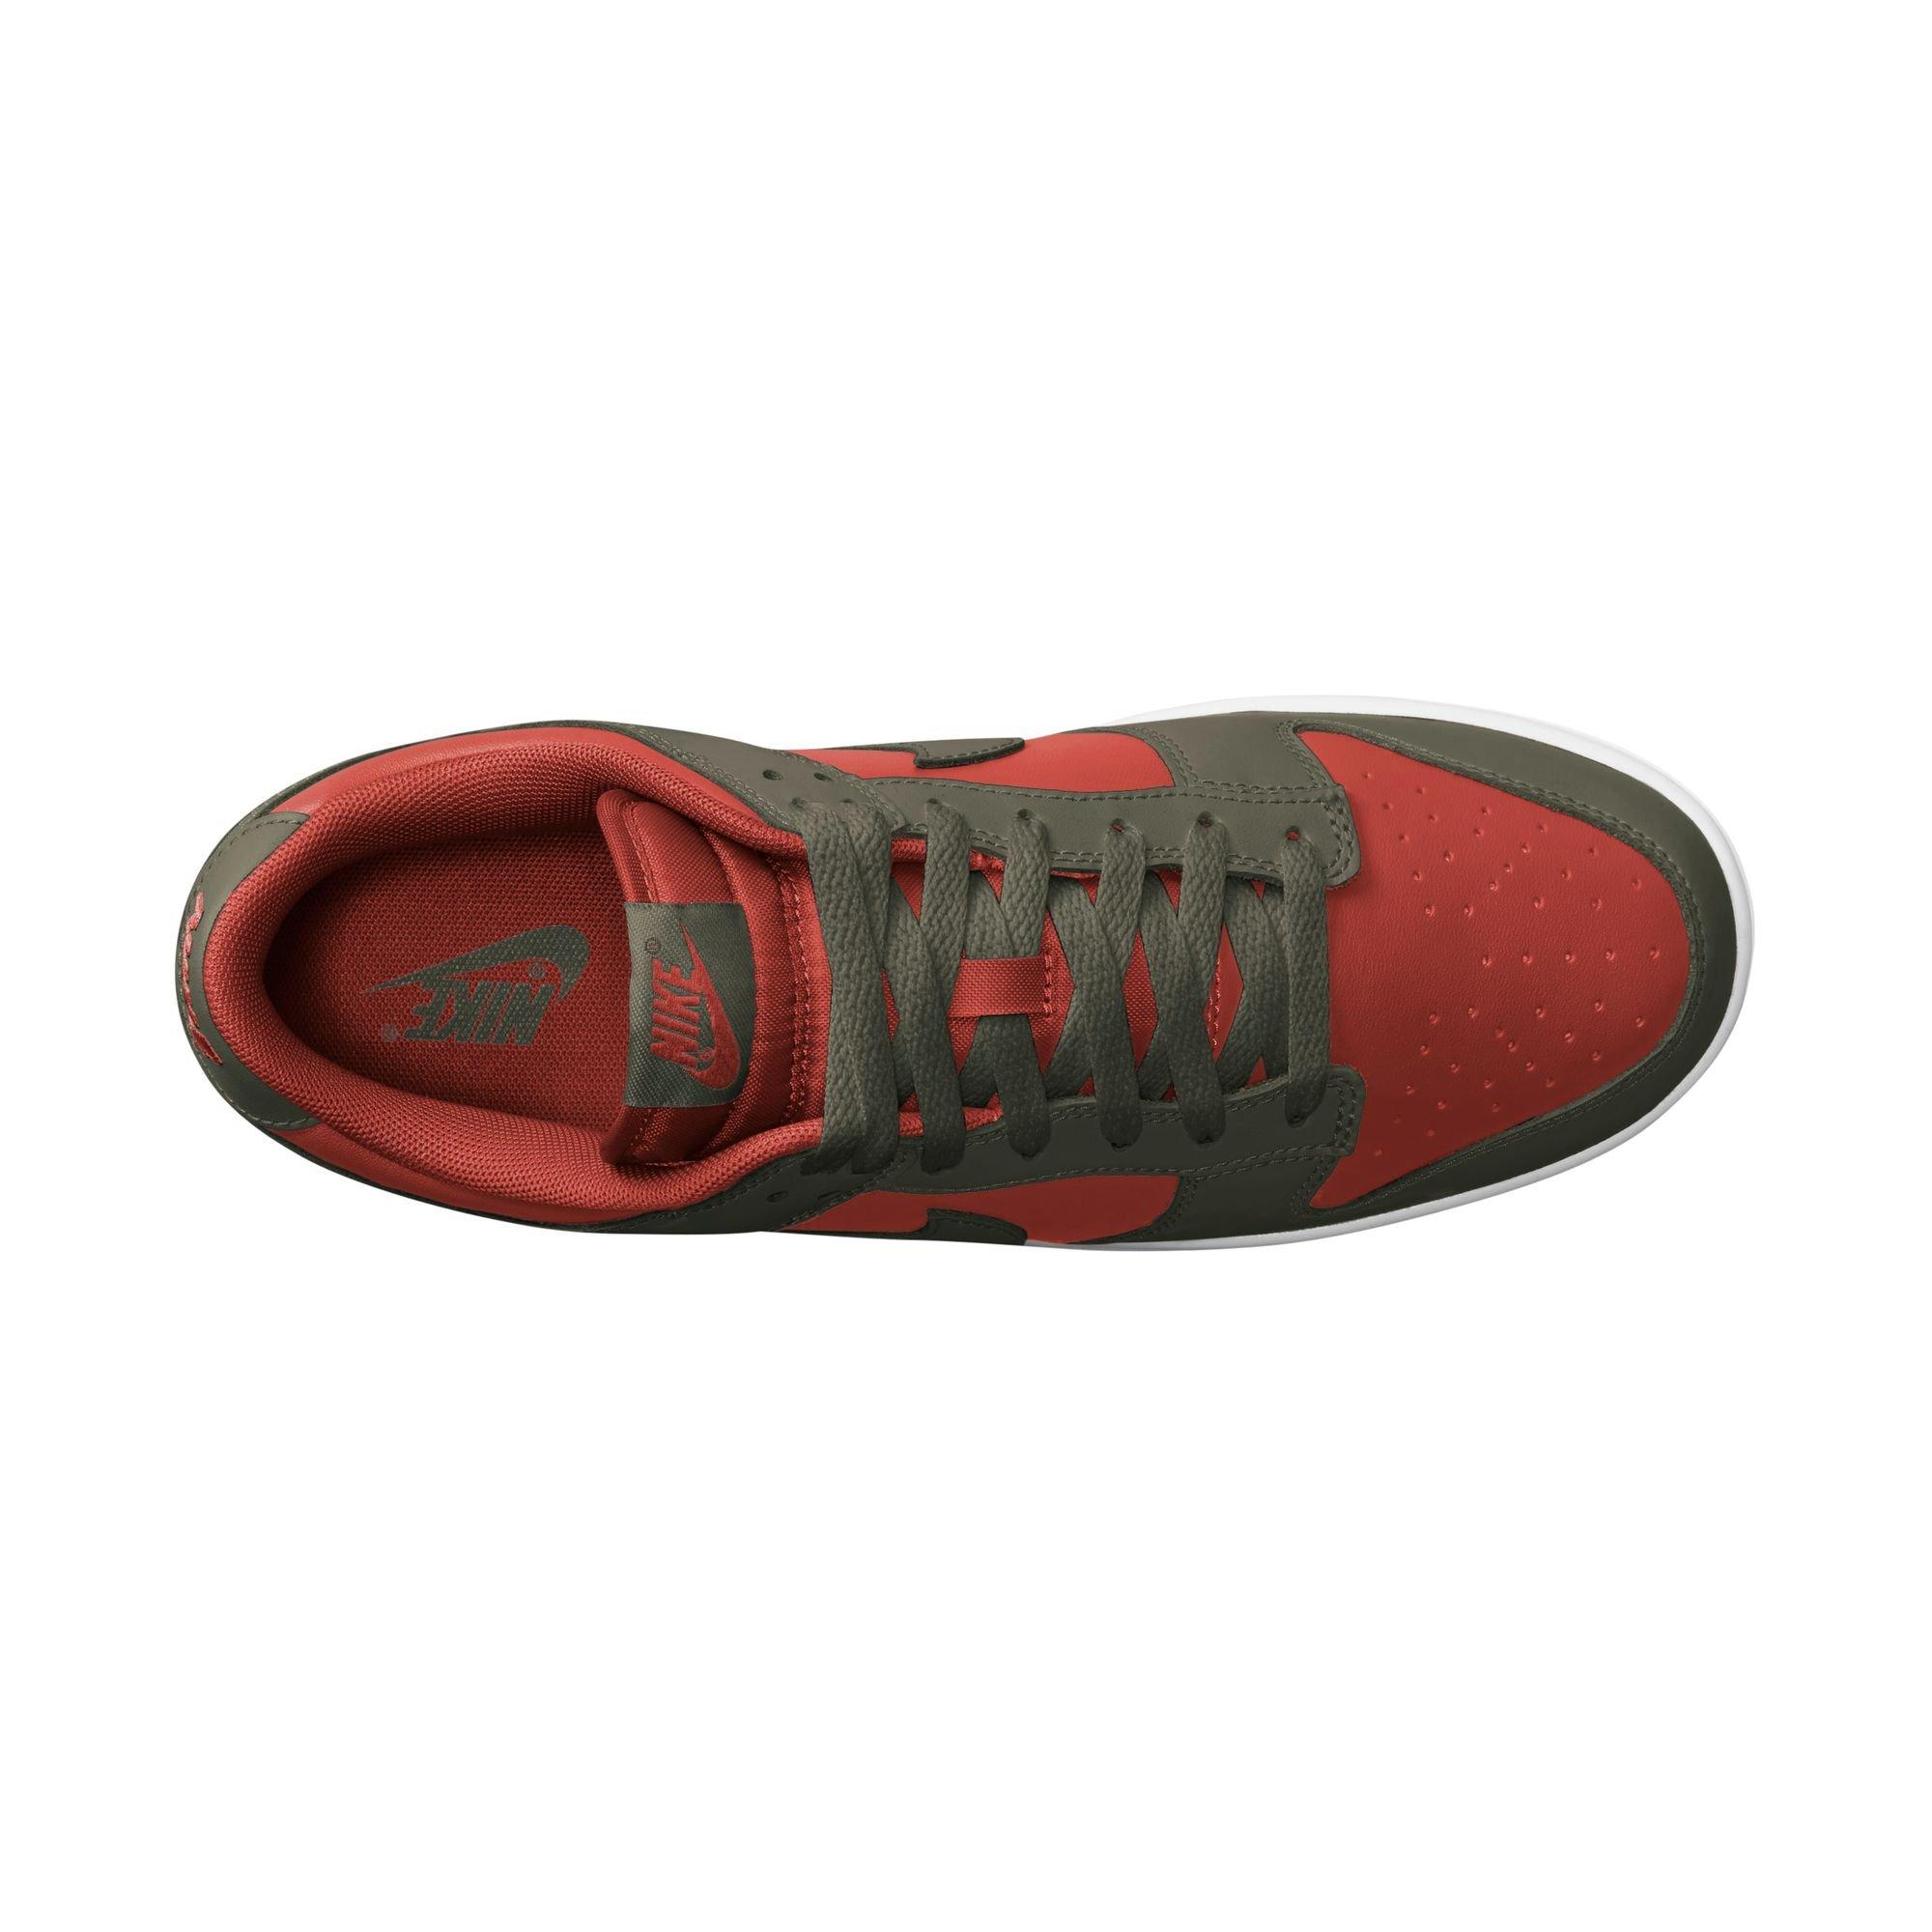 Dunk Low Mystic Red Mens Lifestyle Shoes (Mystic Red/Cargo Khaki/White)  Free Shipping